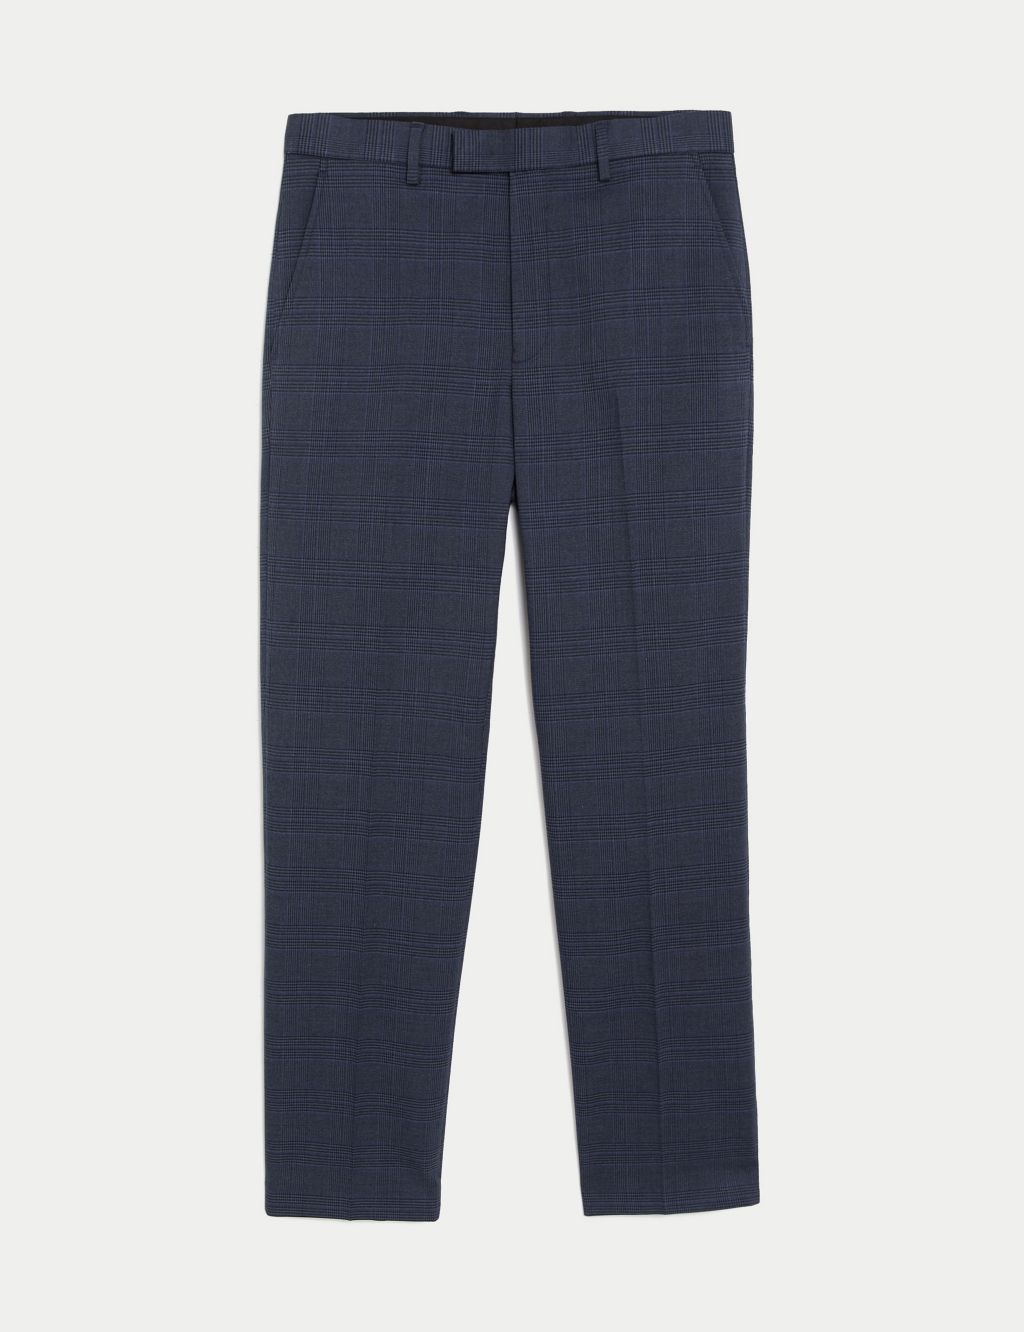 Regular Fit Check Stretch Suit Trousers image 2